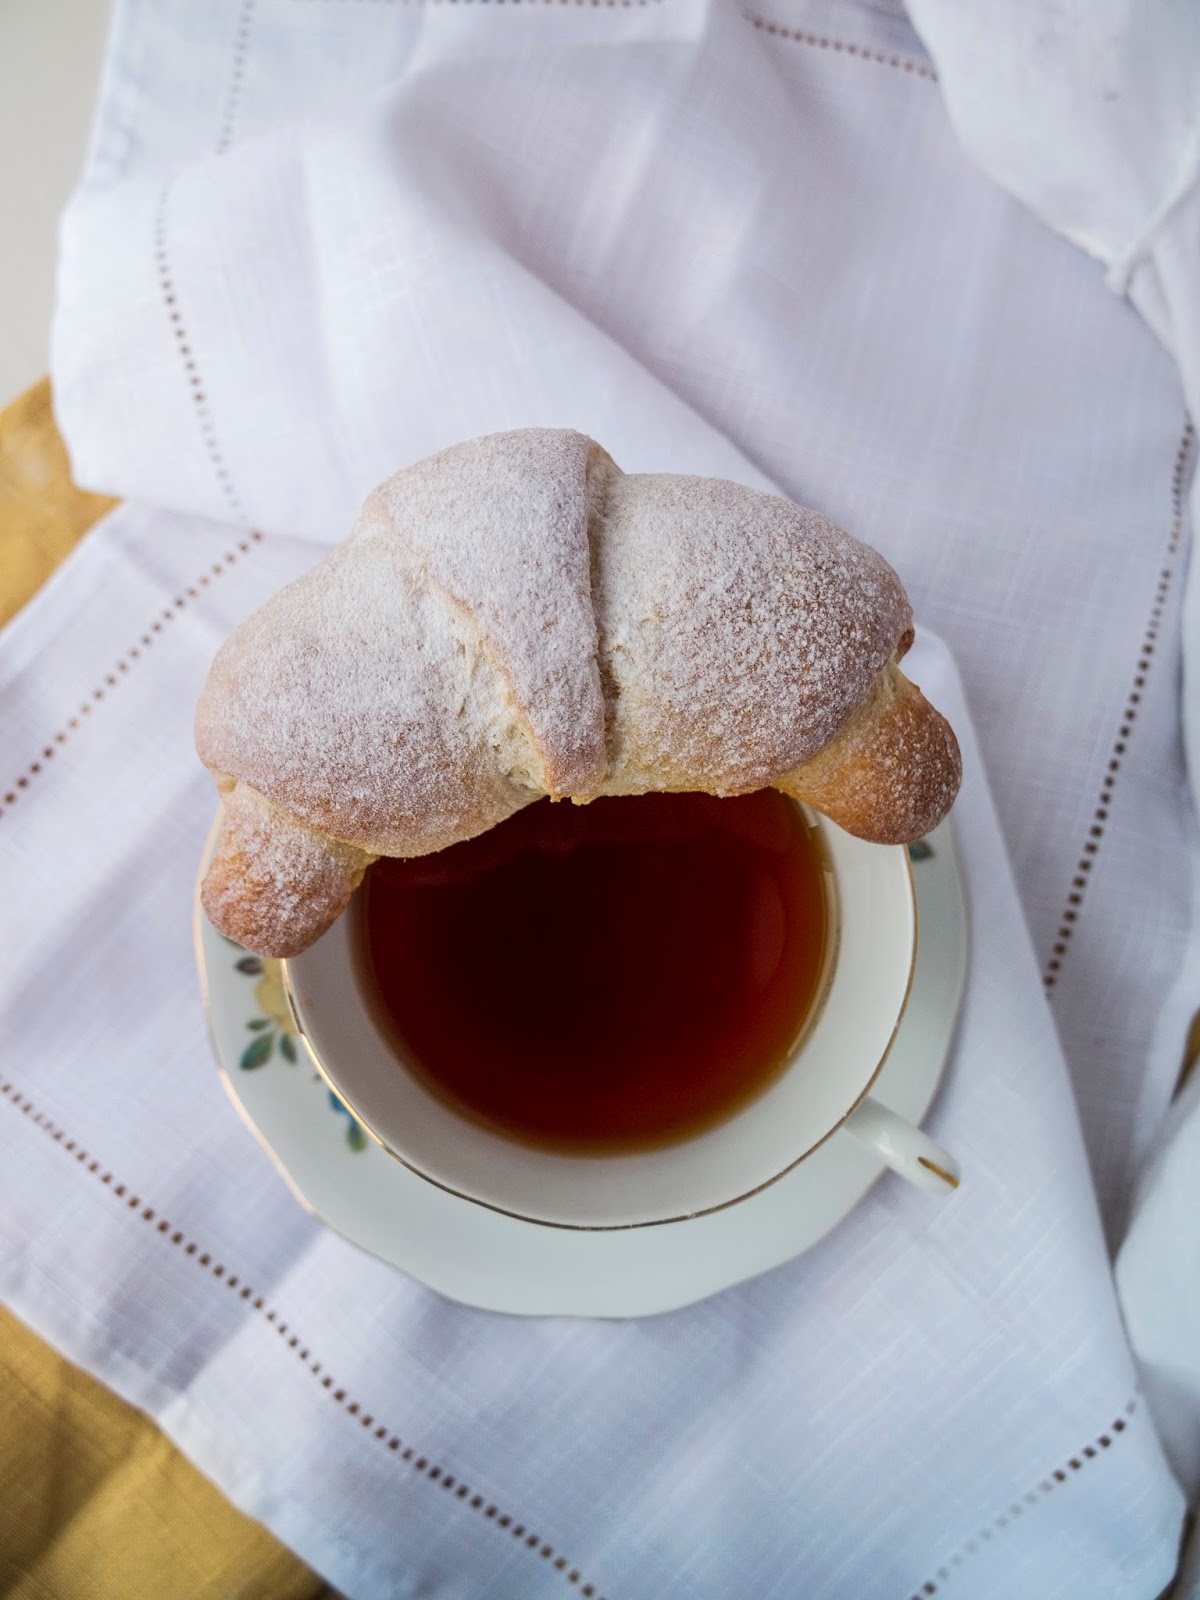 Baked yeast dough filled with chocolate sitting on a teacup.